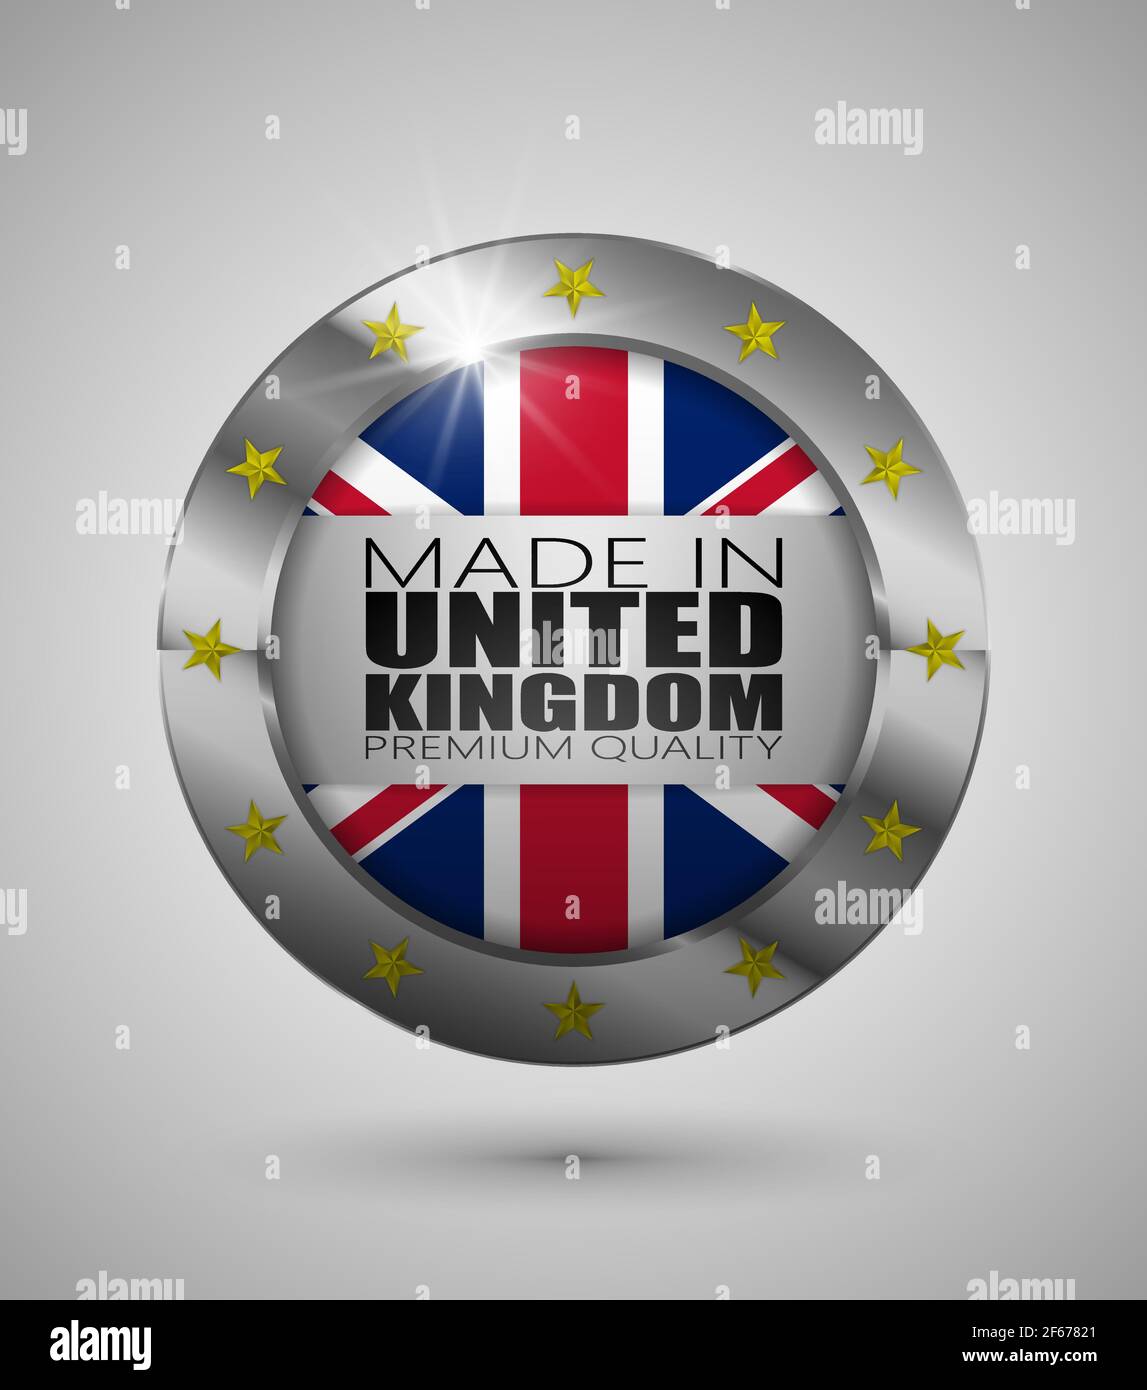 EPS10 Vector illustration. Realistic button. Made in United Kingdom, Premium Quality. Perfect for any use. Stock Vector